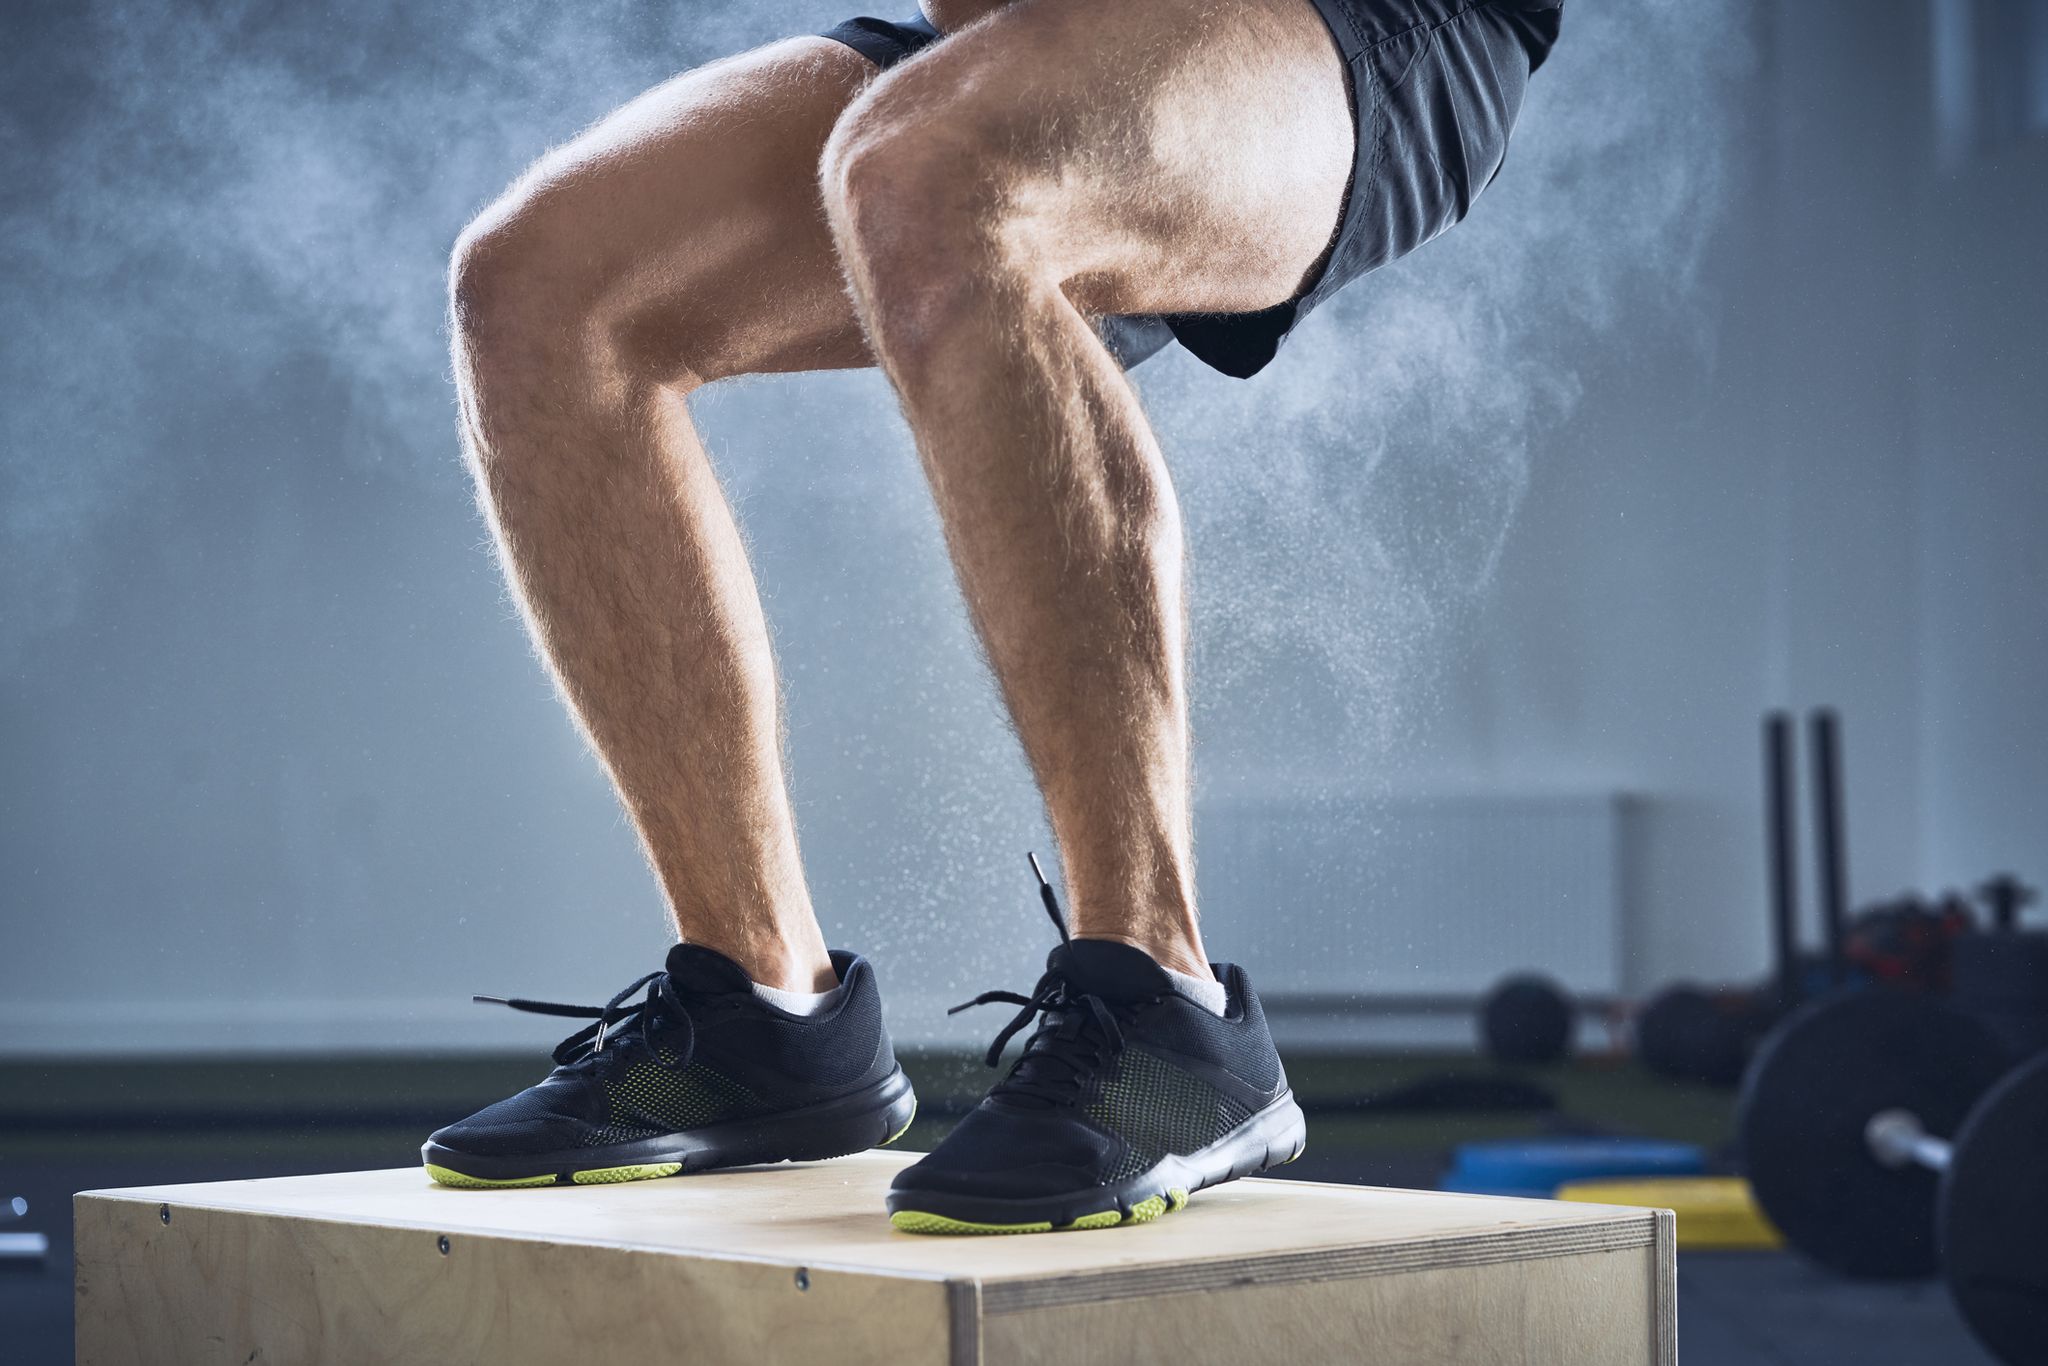 6 Super Easy Leg Workouts For Men At Home - Leg Exercises Without Equipment